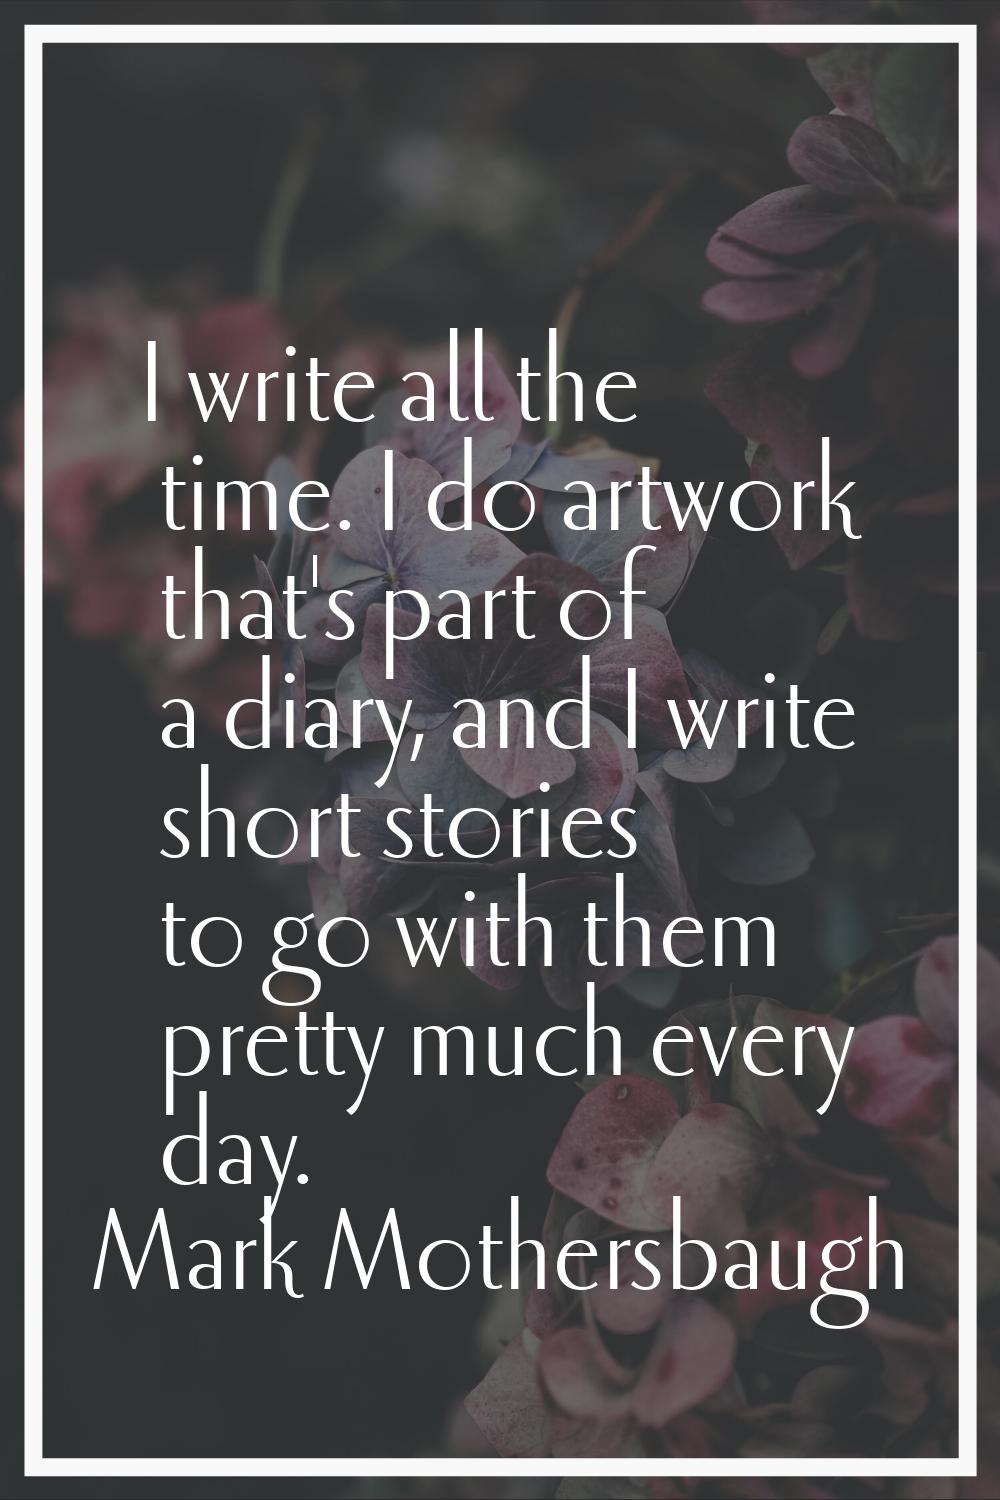 I write all the time. I do artwork that's part of a diary, and I write short stories to go with the